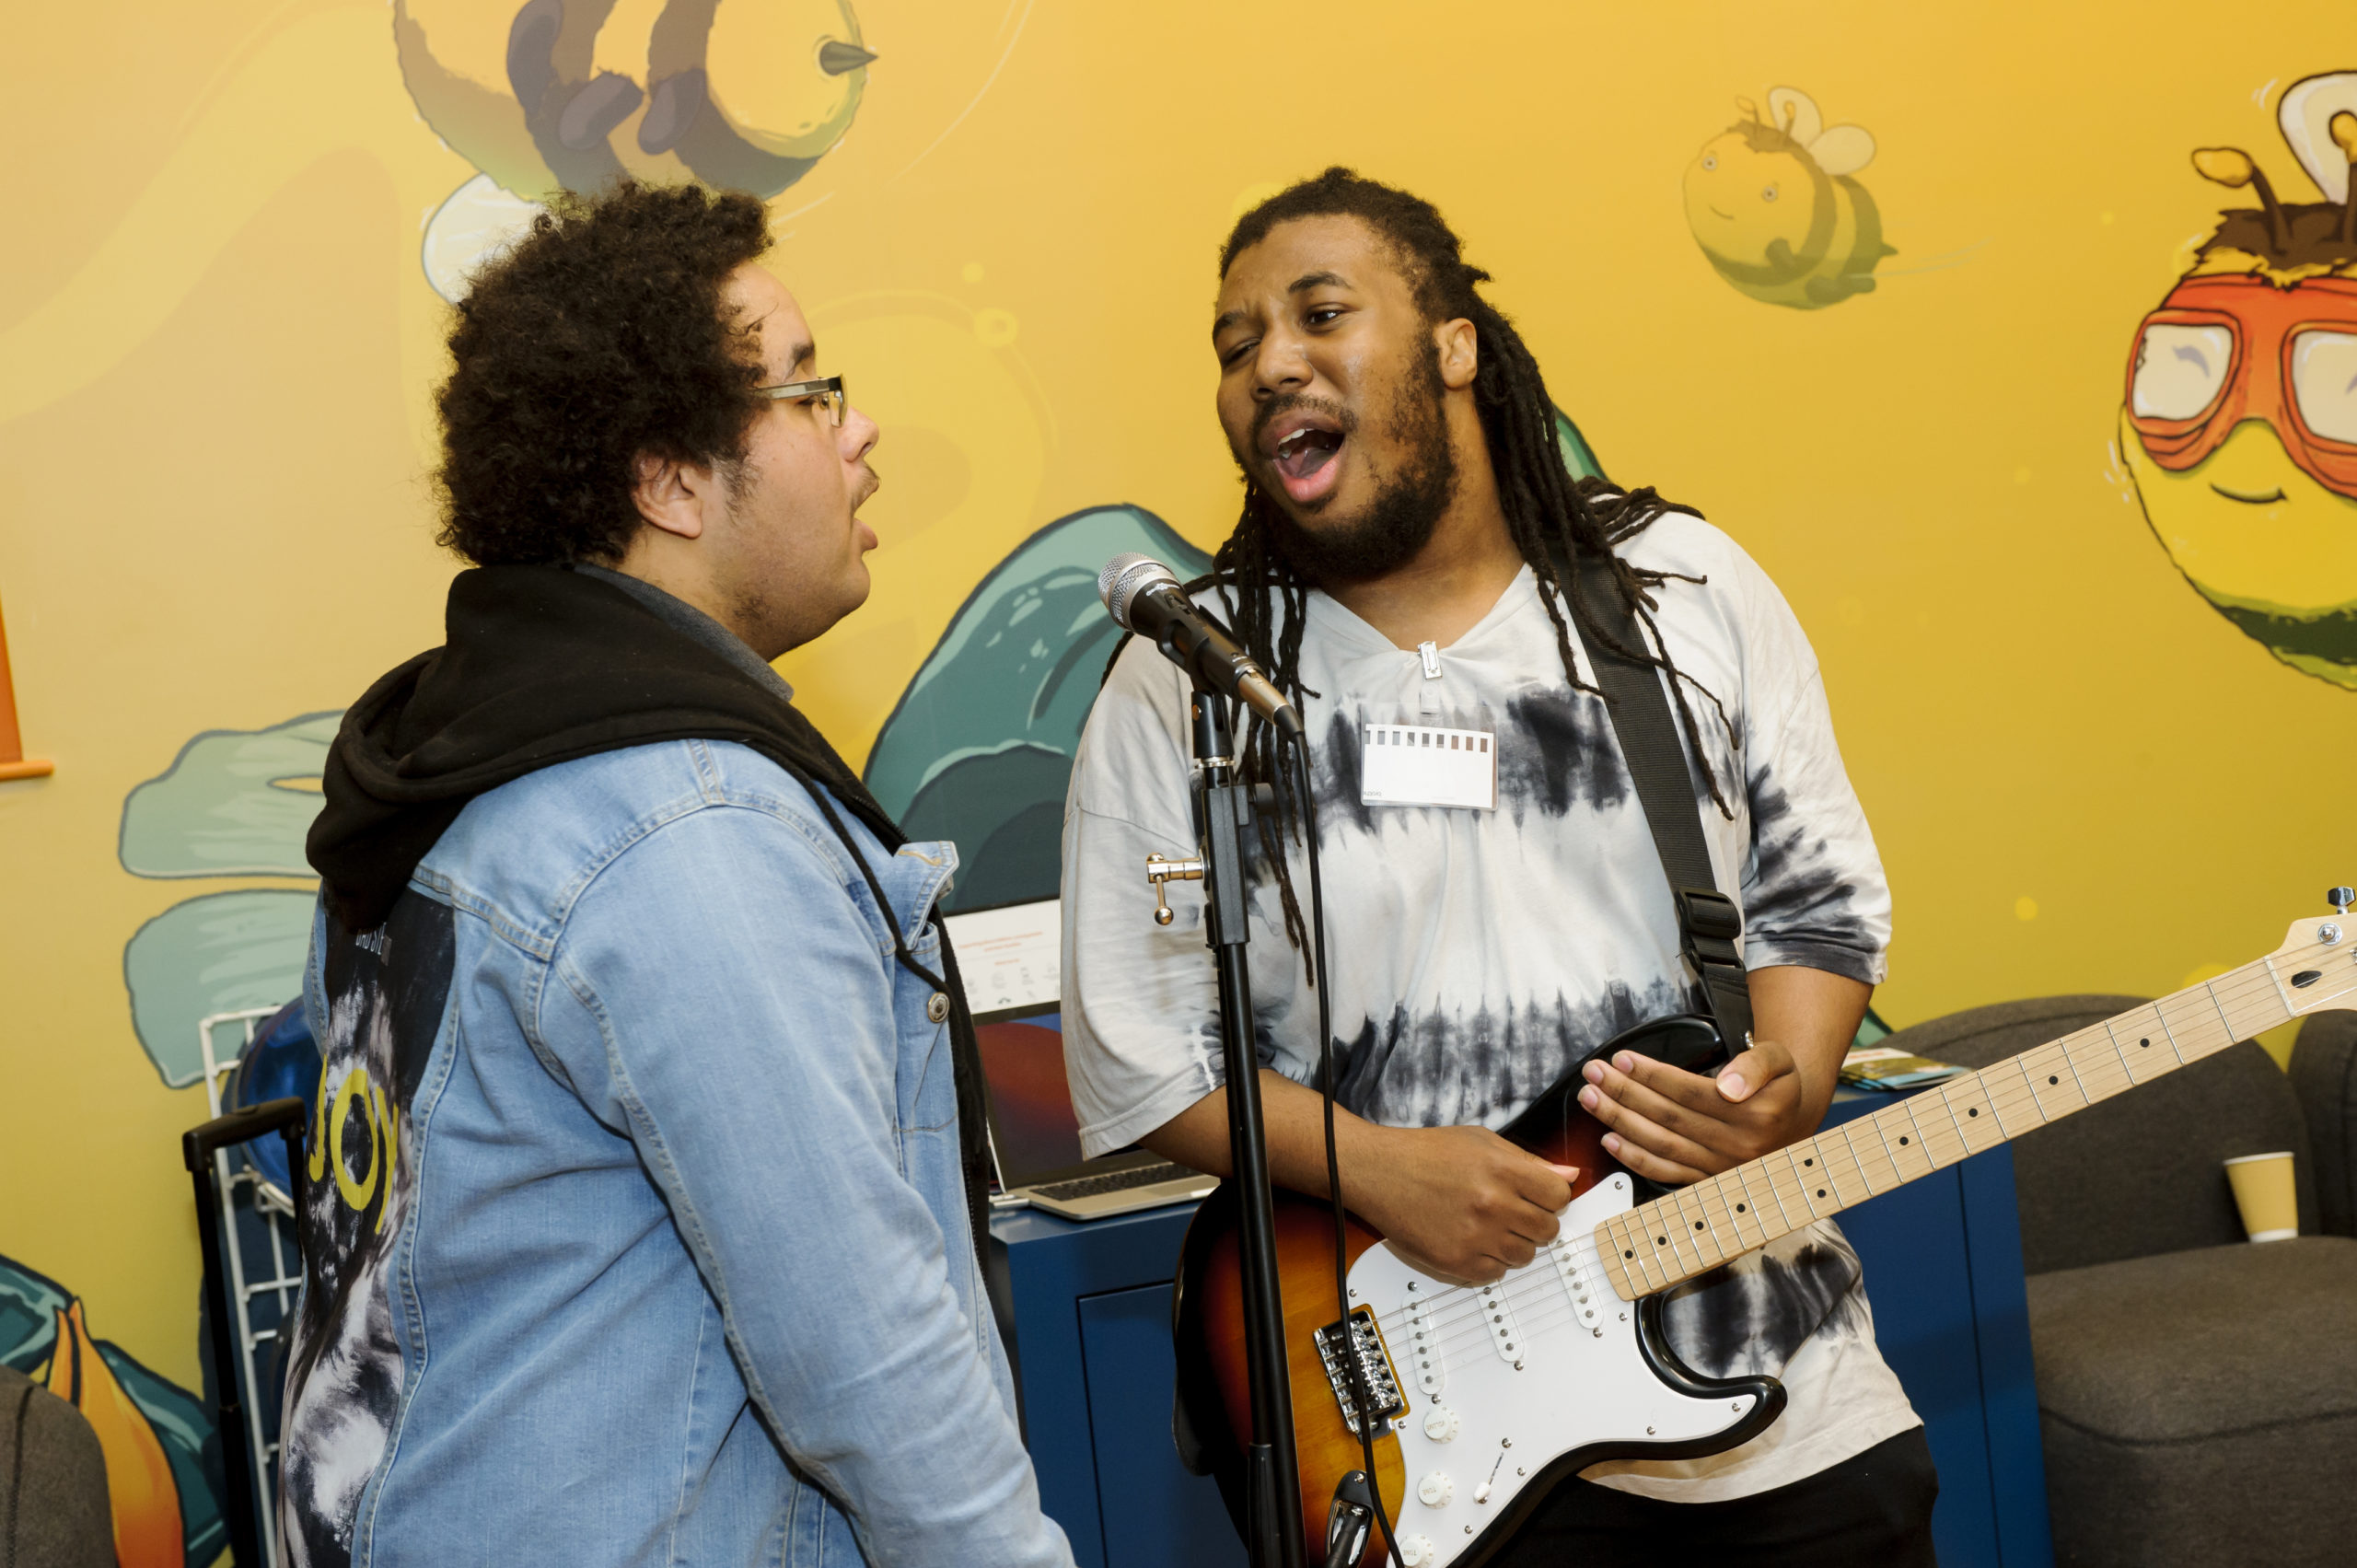 Two young men performing a song, one is singing and one is playing the guitar